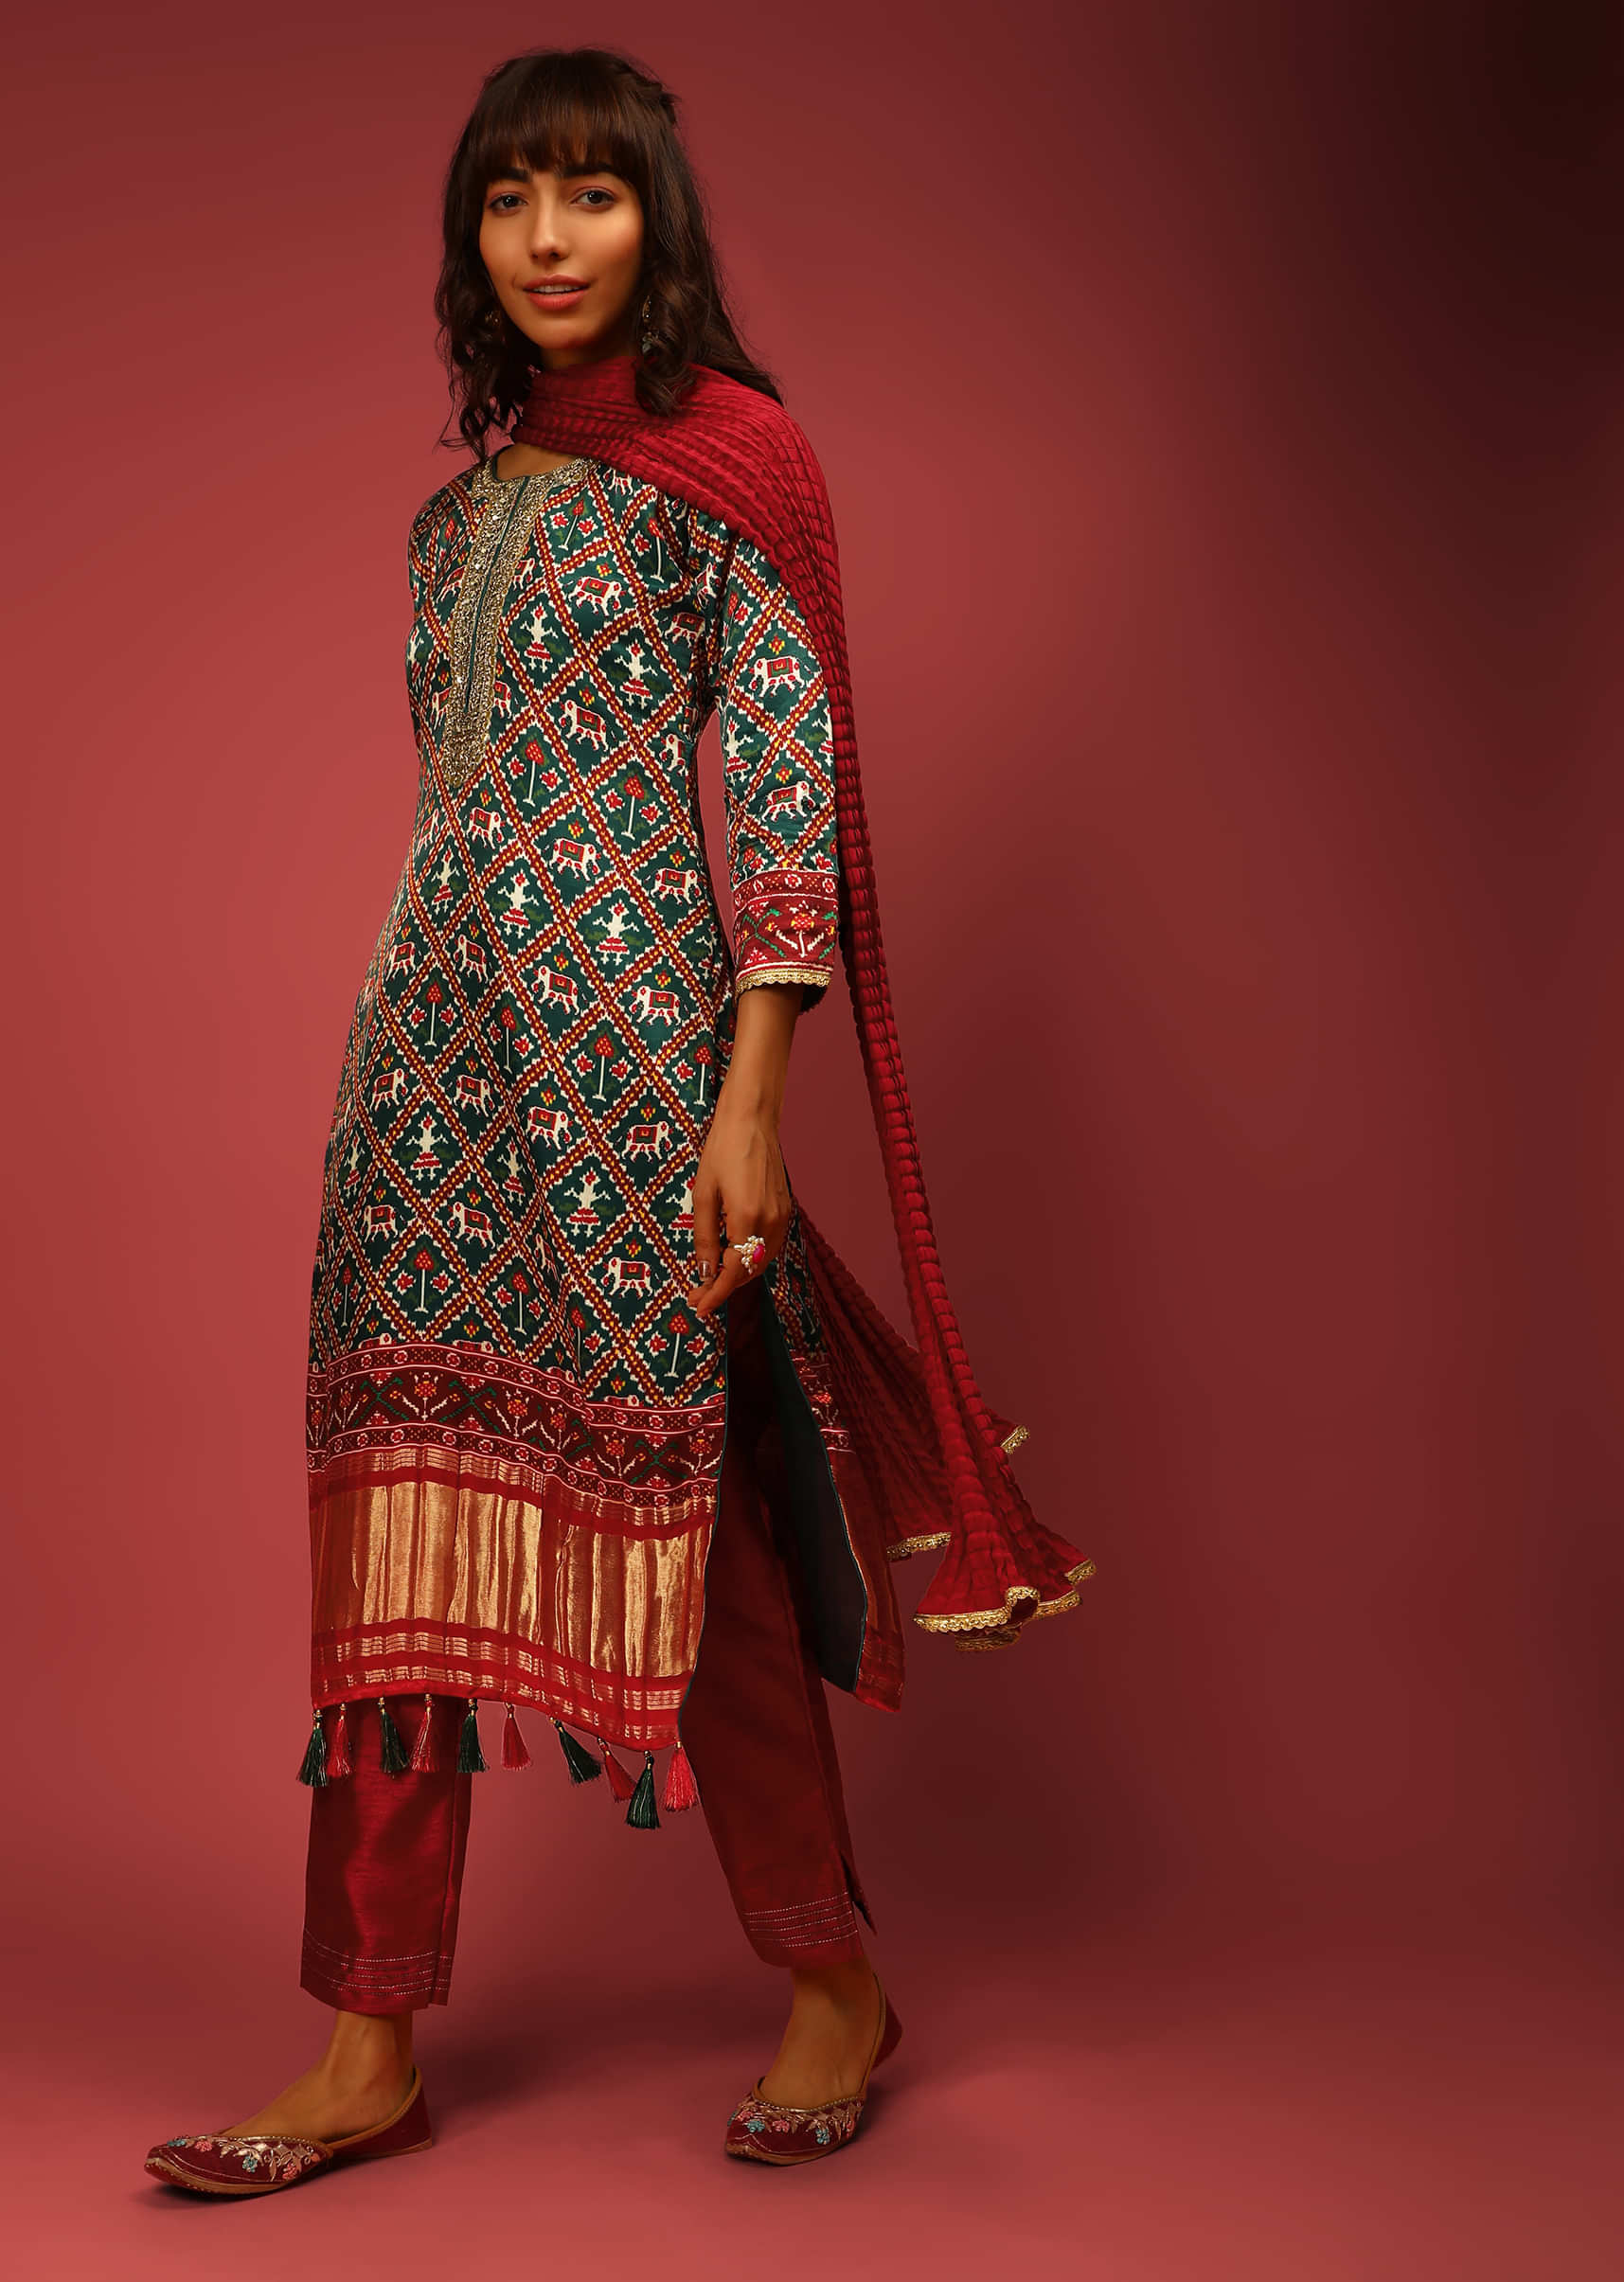 Bottle Green Straight Cut Suit In Satin Blend With Patola Print And Brocade Border Edged In Tassels  